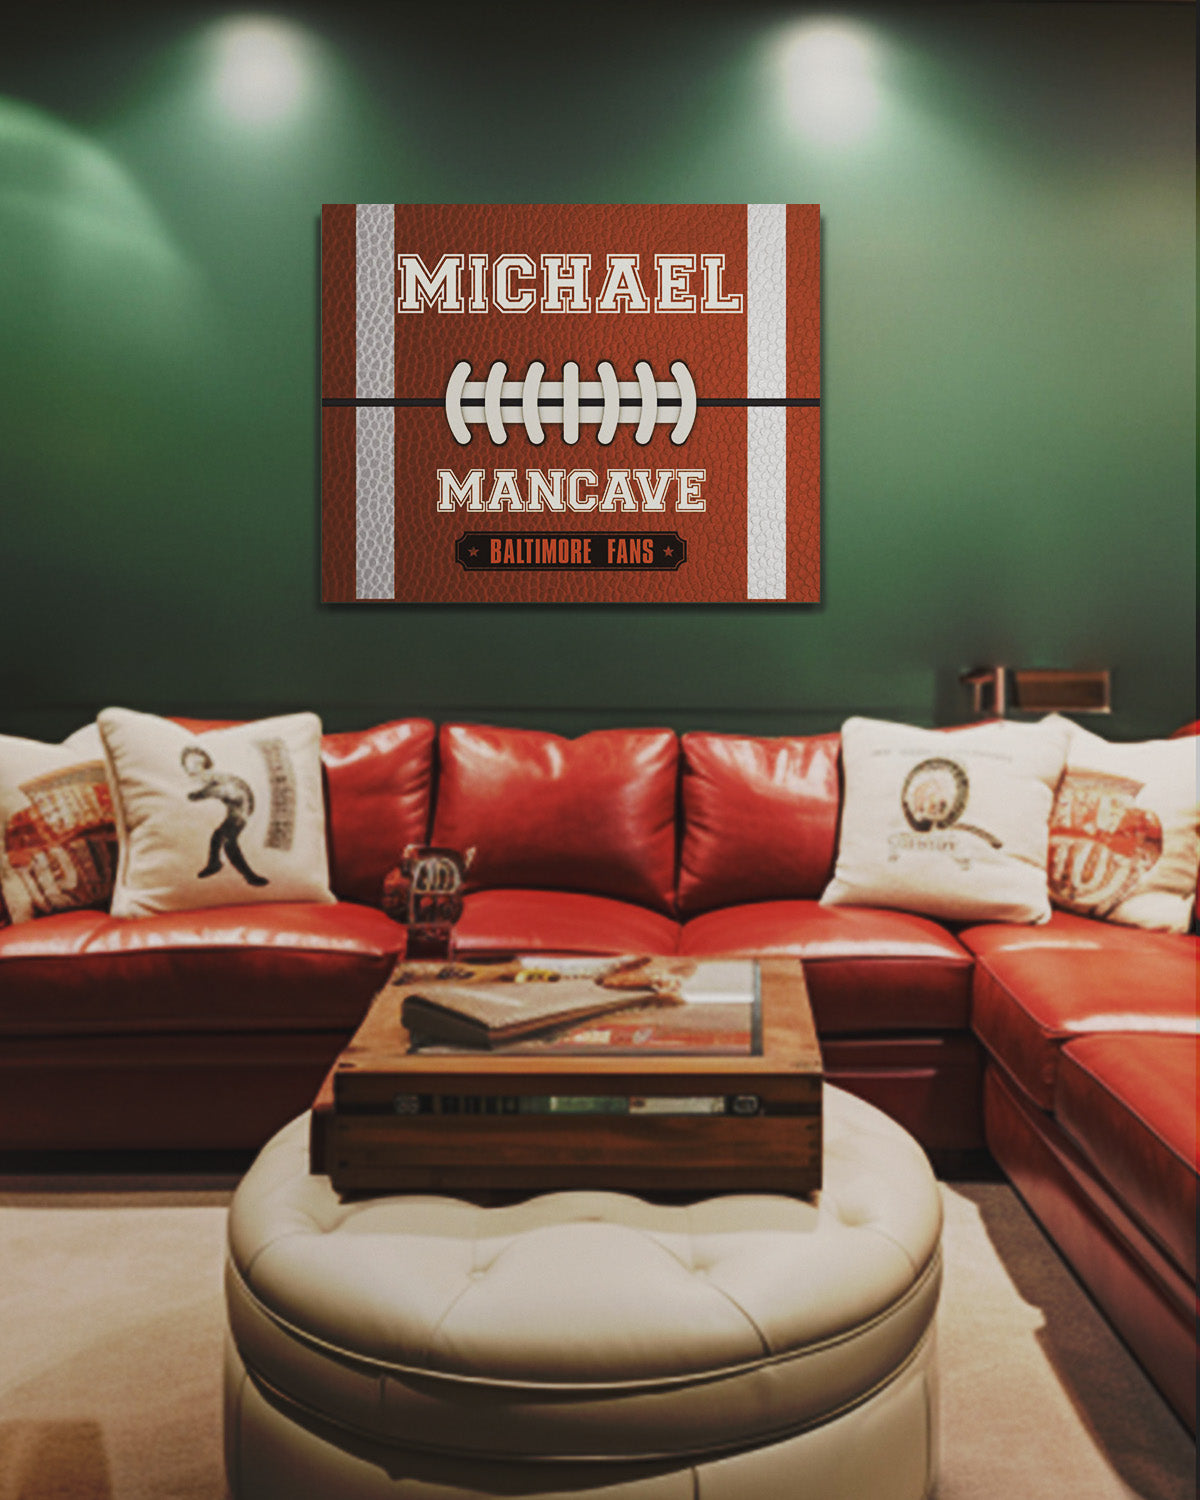 Football Mancave Wall Art - Customizable with Last Name and Team - Motivational Football Wall Art for Boys Bedroom, Locker Room, or Coach Gift - Inspirational Football Quotes